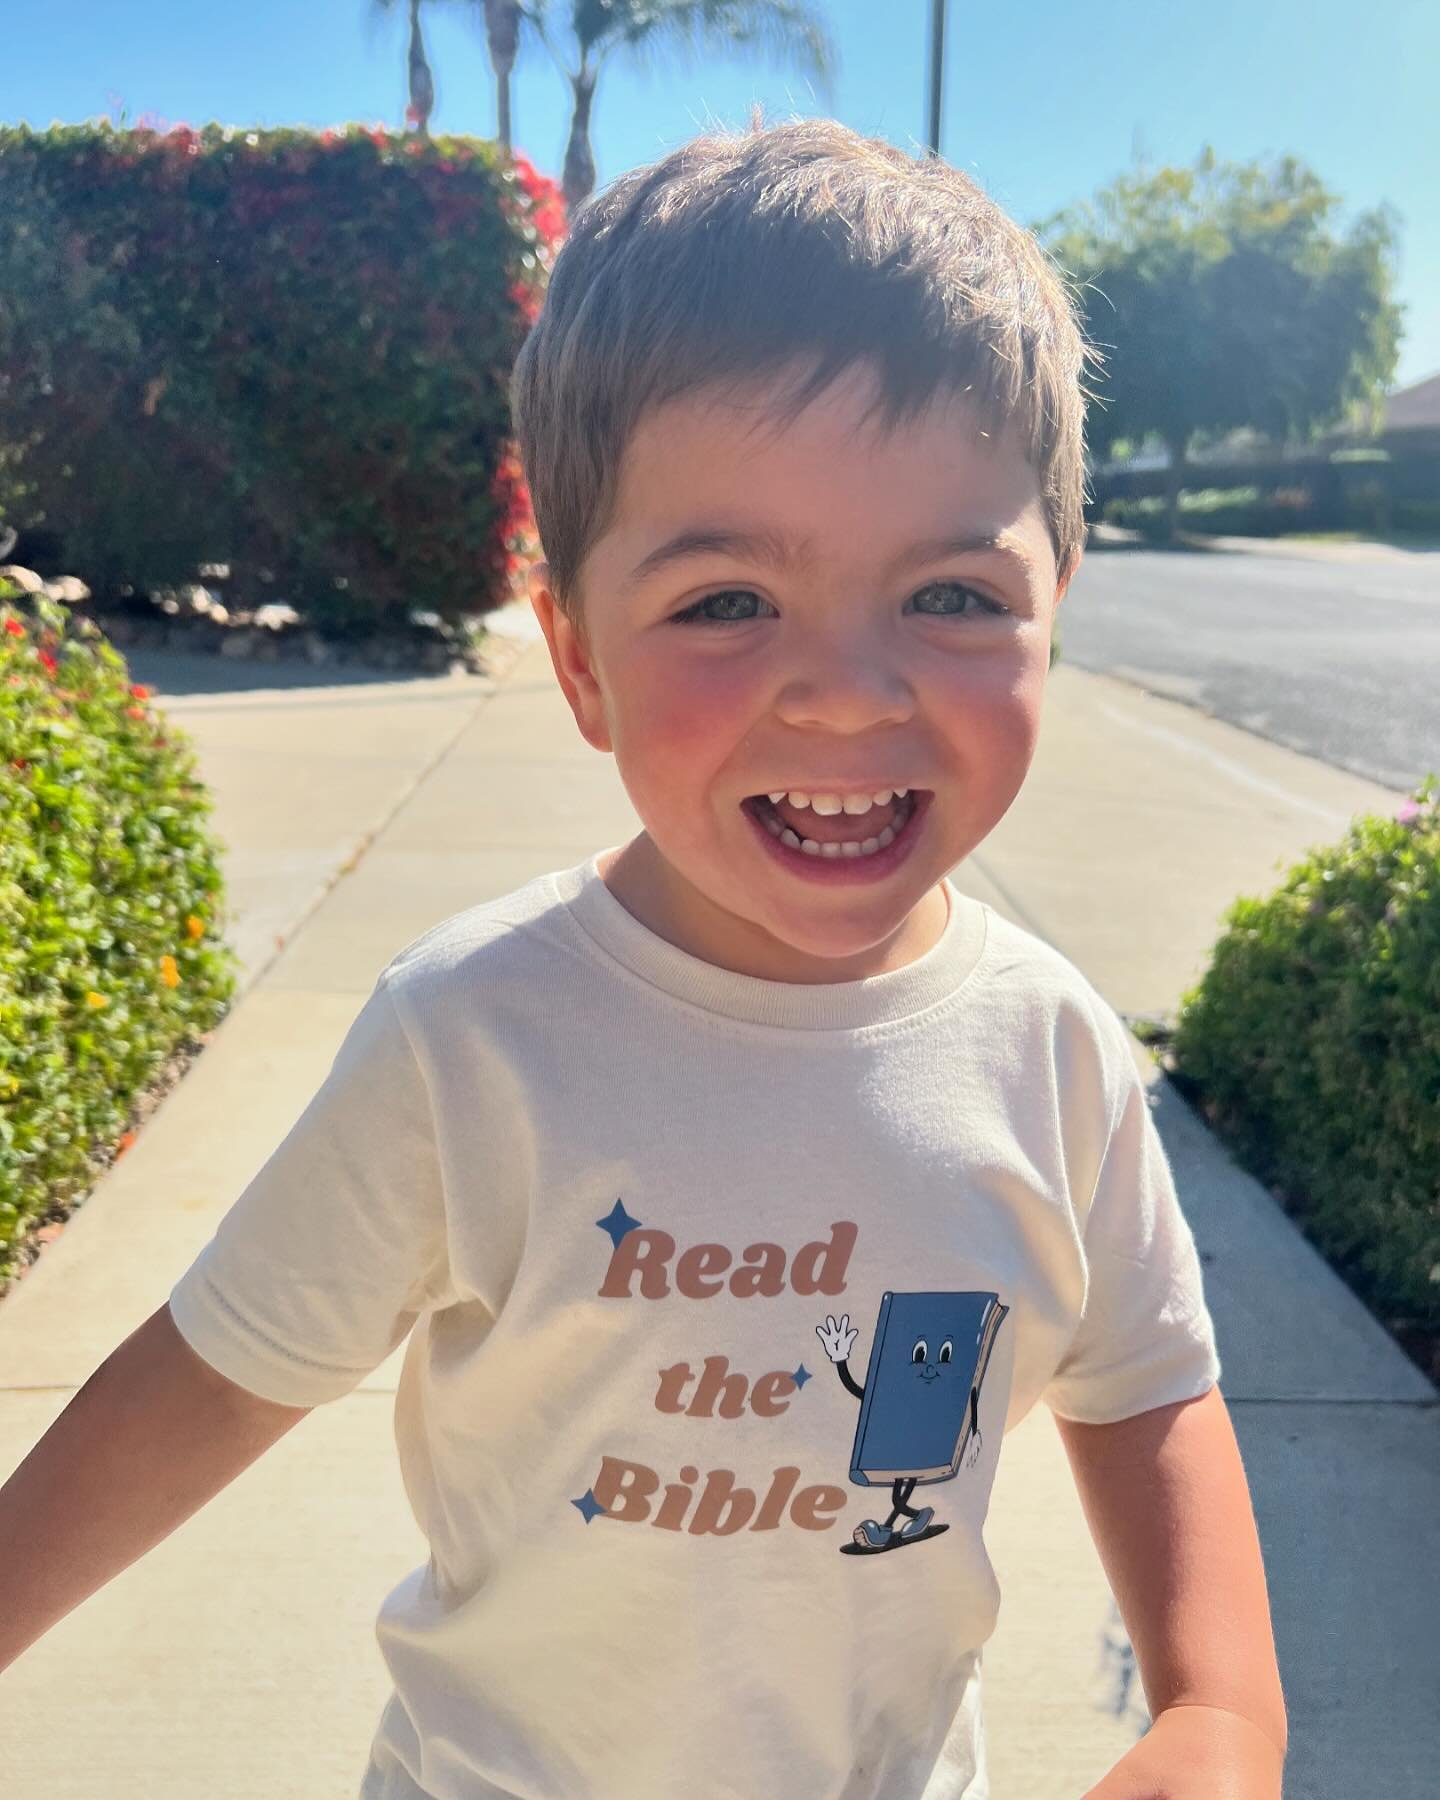 My son came running over to me this morning while carrying this shirt and said &ldquo;Bible man, put on!&rdquo; I was so filled with joy seeing that my son enjoys the designs I make just as much as I do 🥰